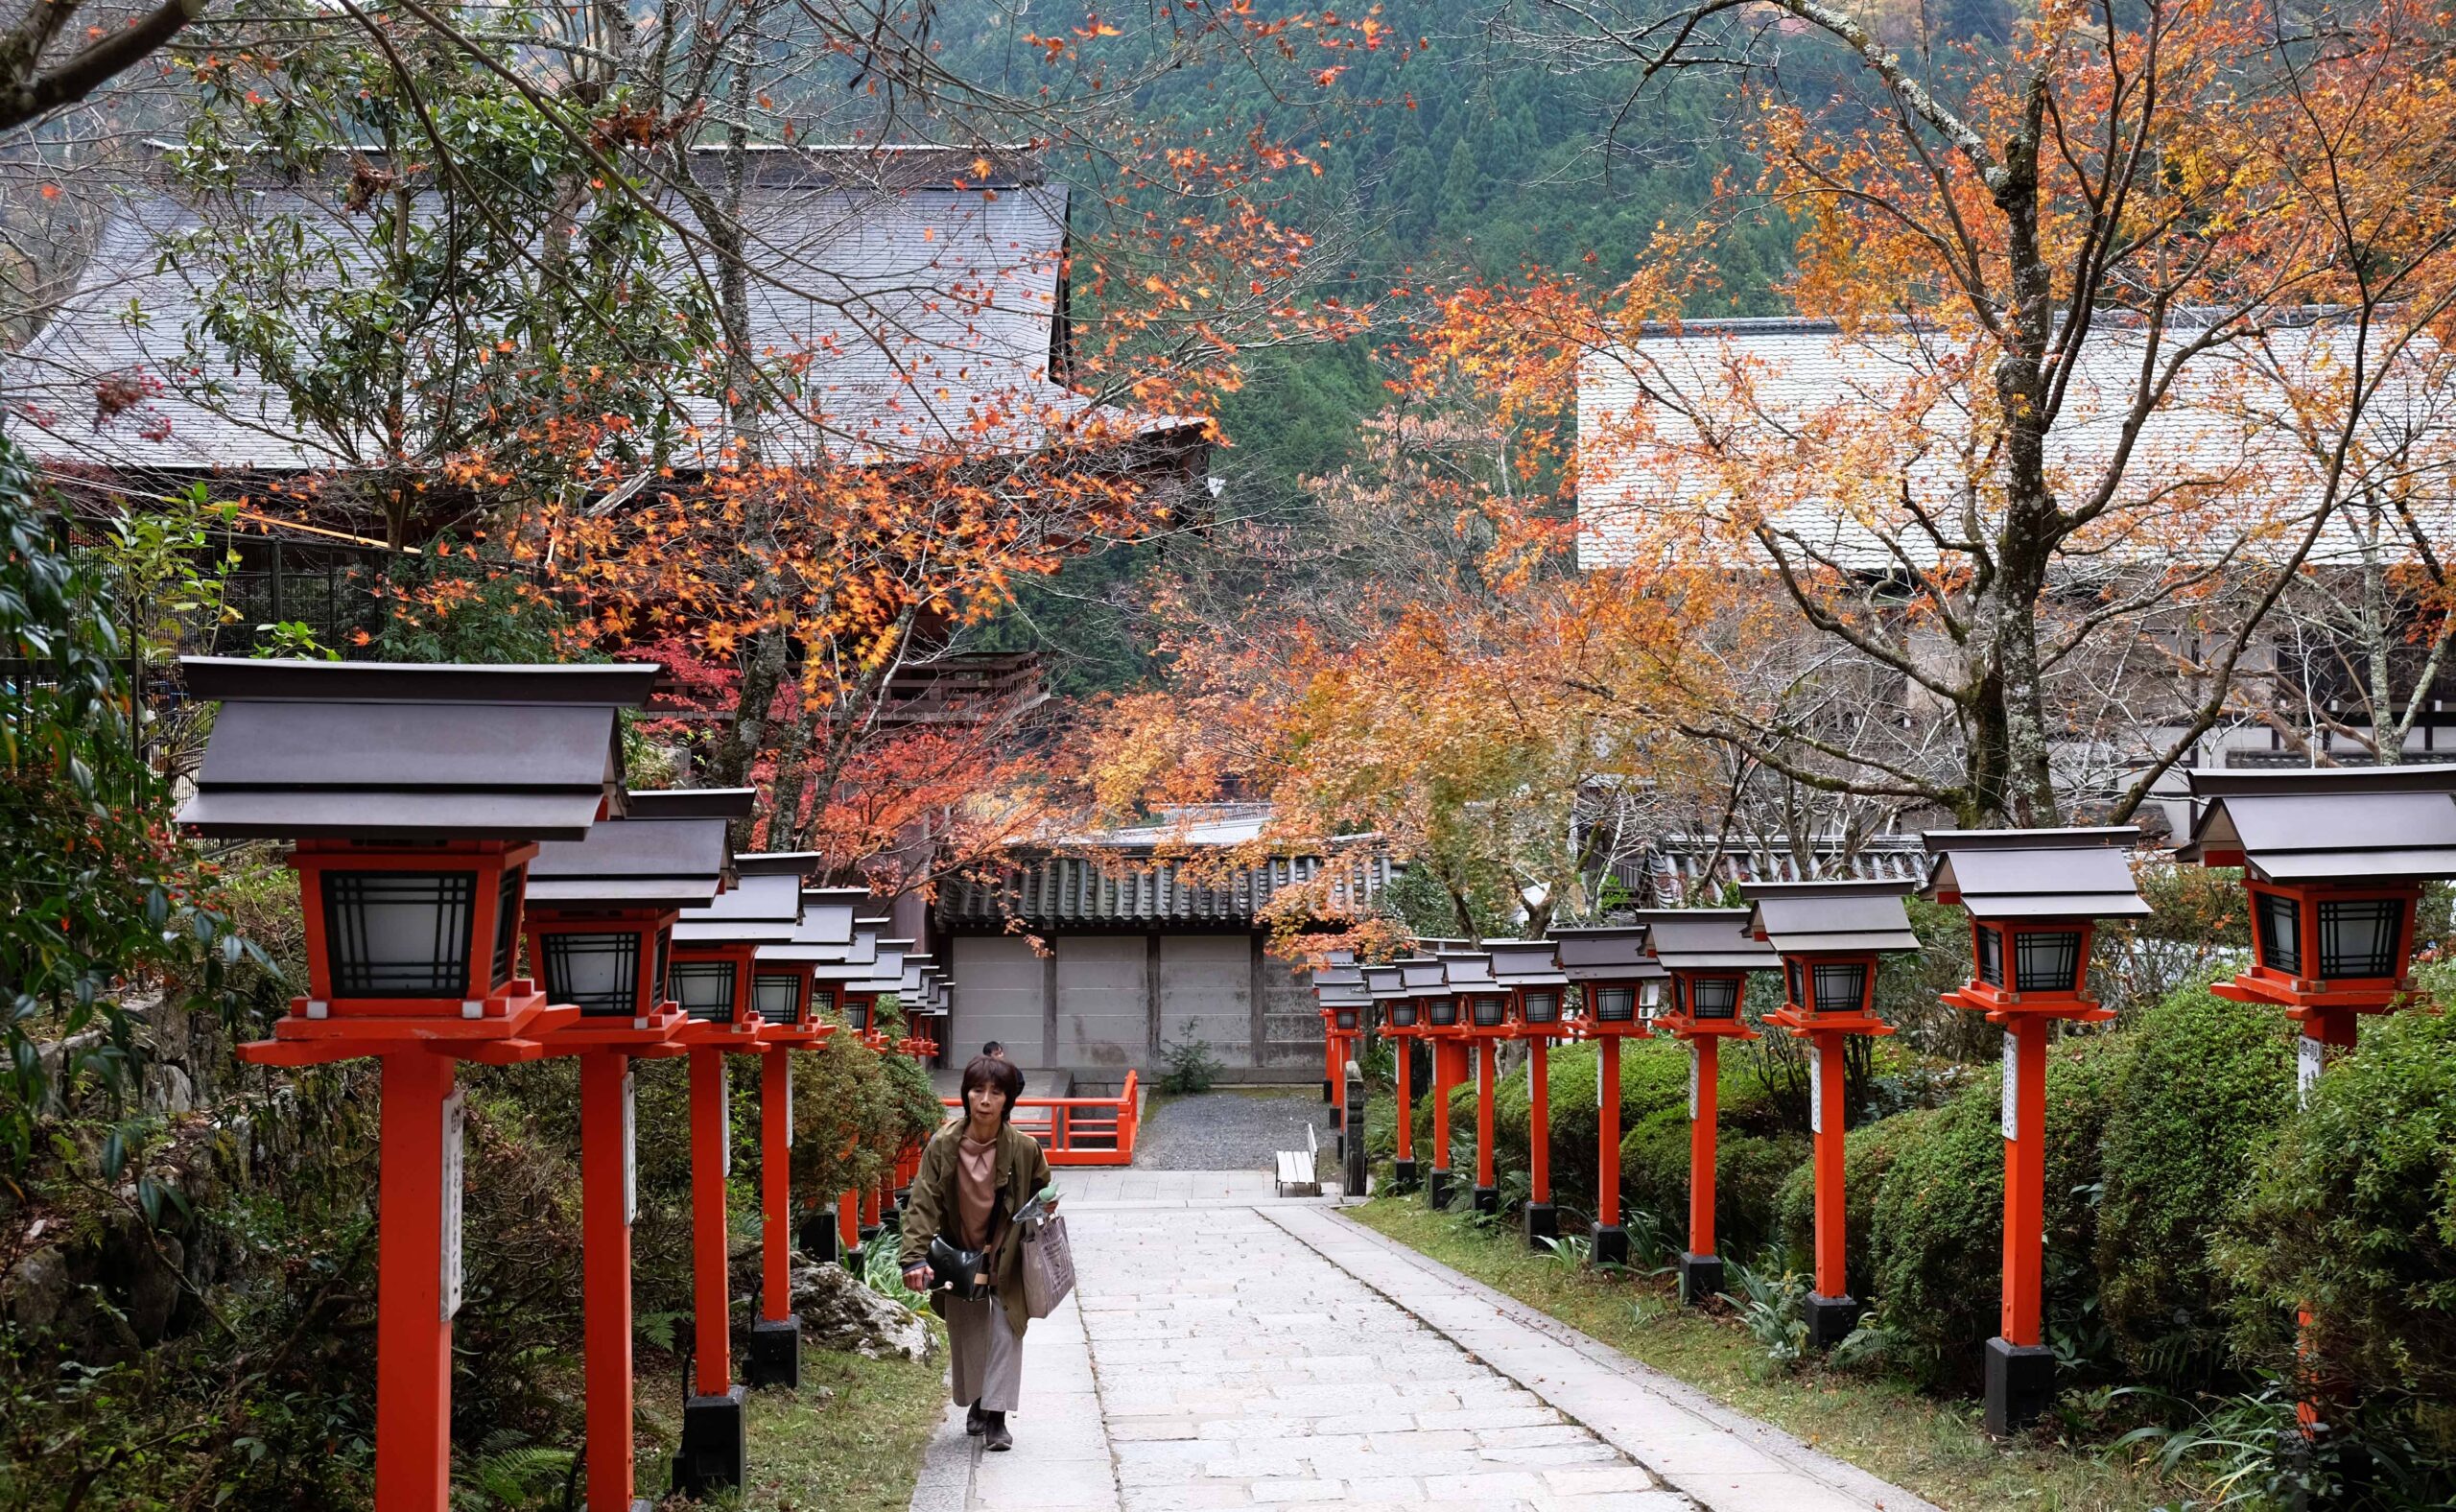 Steps leading up to a temple, autumn foliage, red posts with lanterns